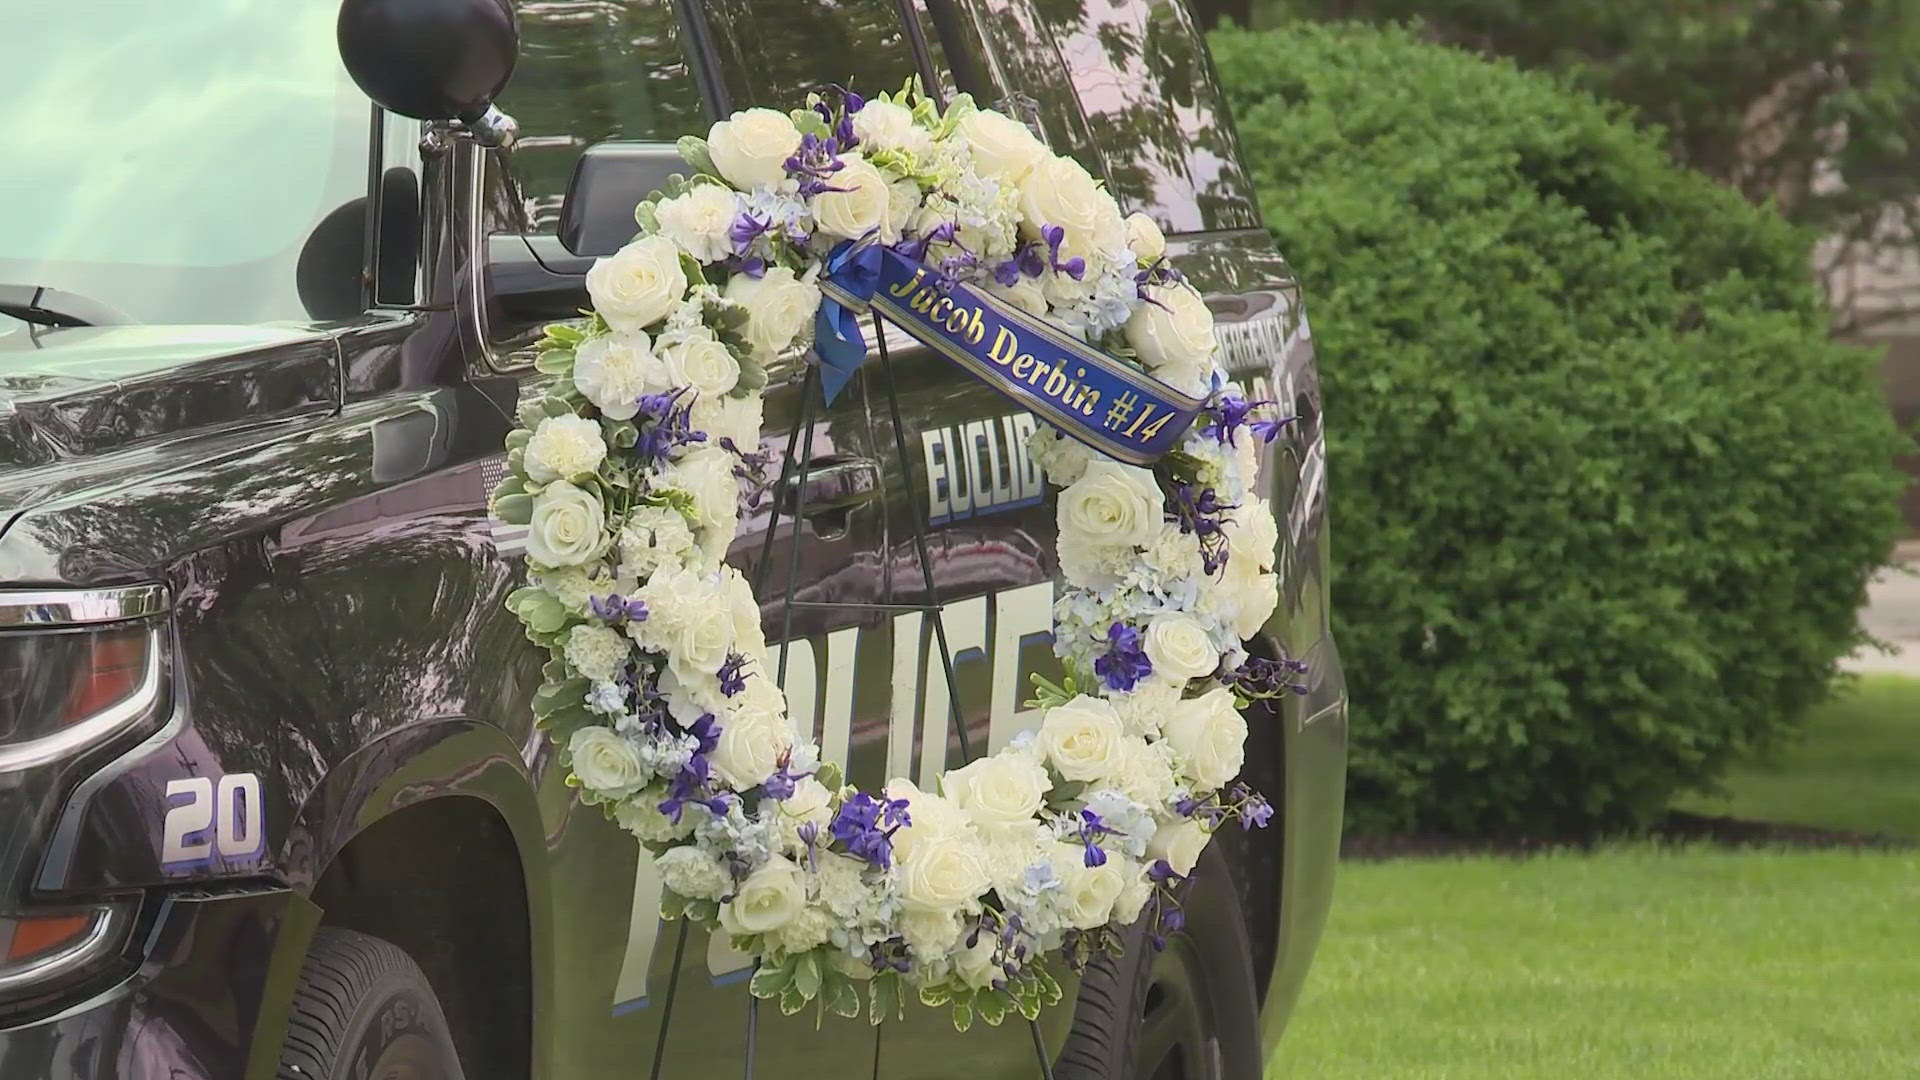 As a community says farewell to fallen Officer Jacob Derbin, there is a growing call for outrage across municipal, political and social boundary lines.